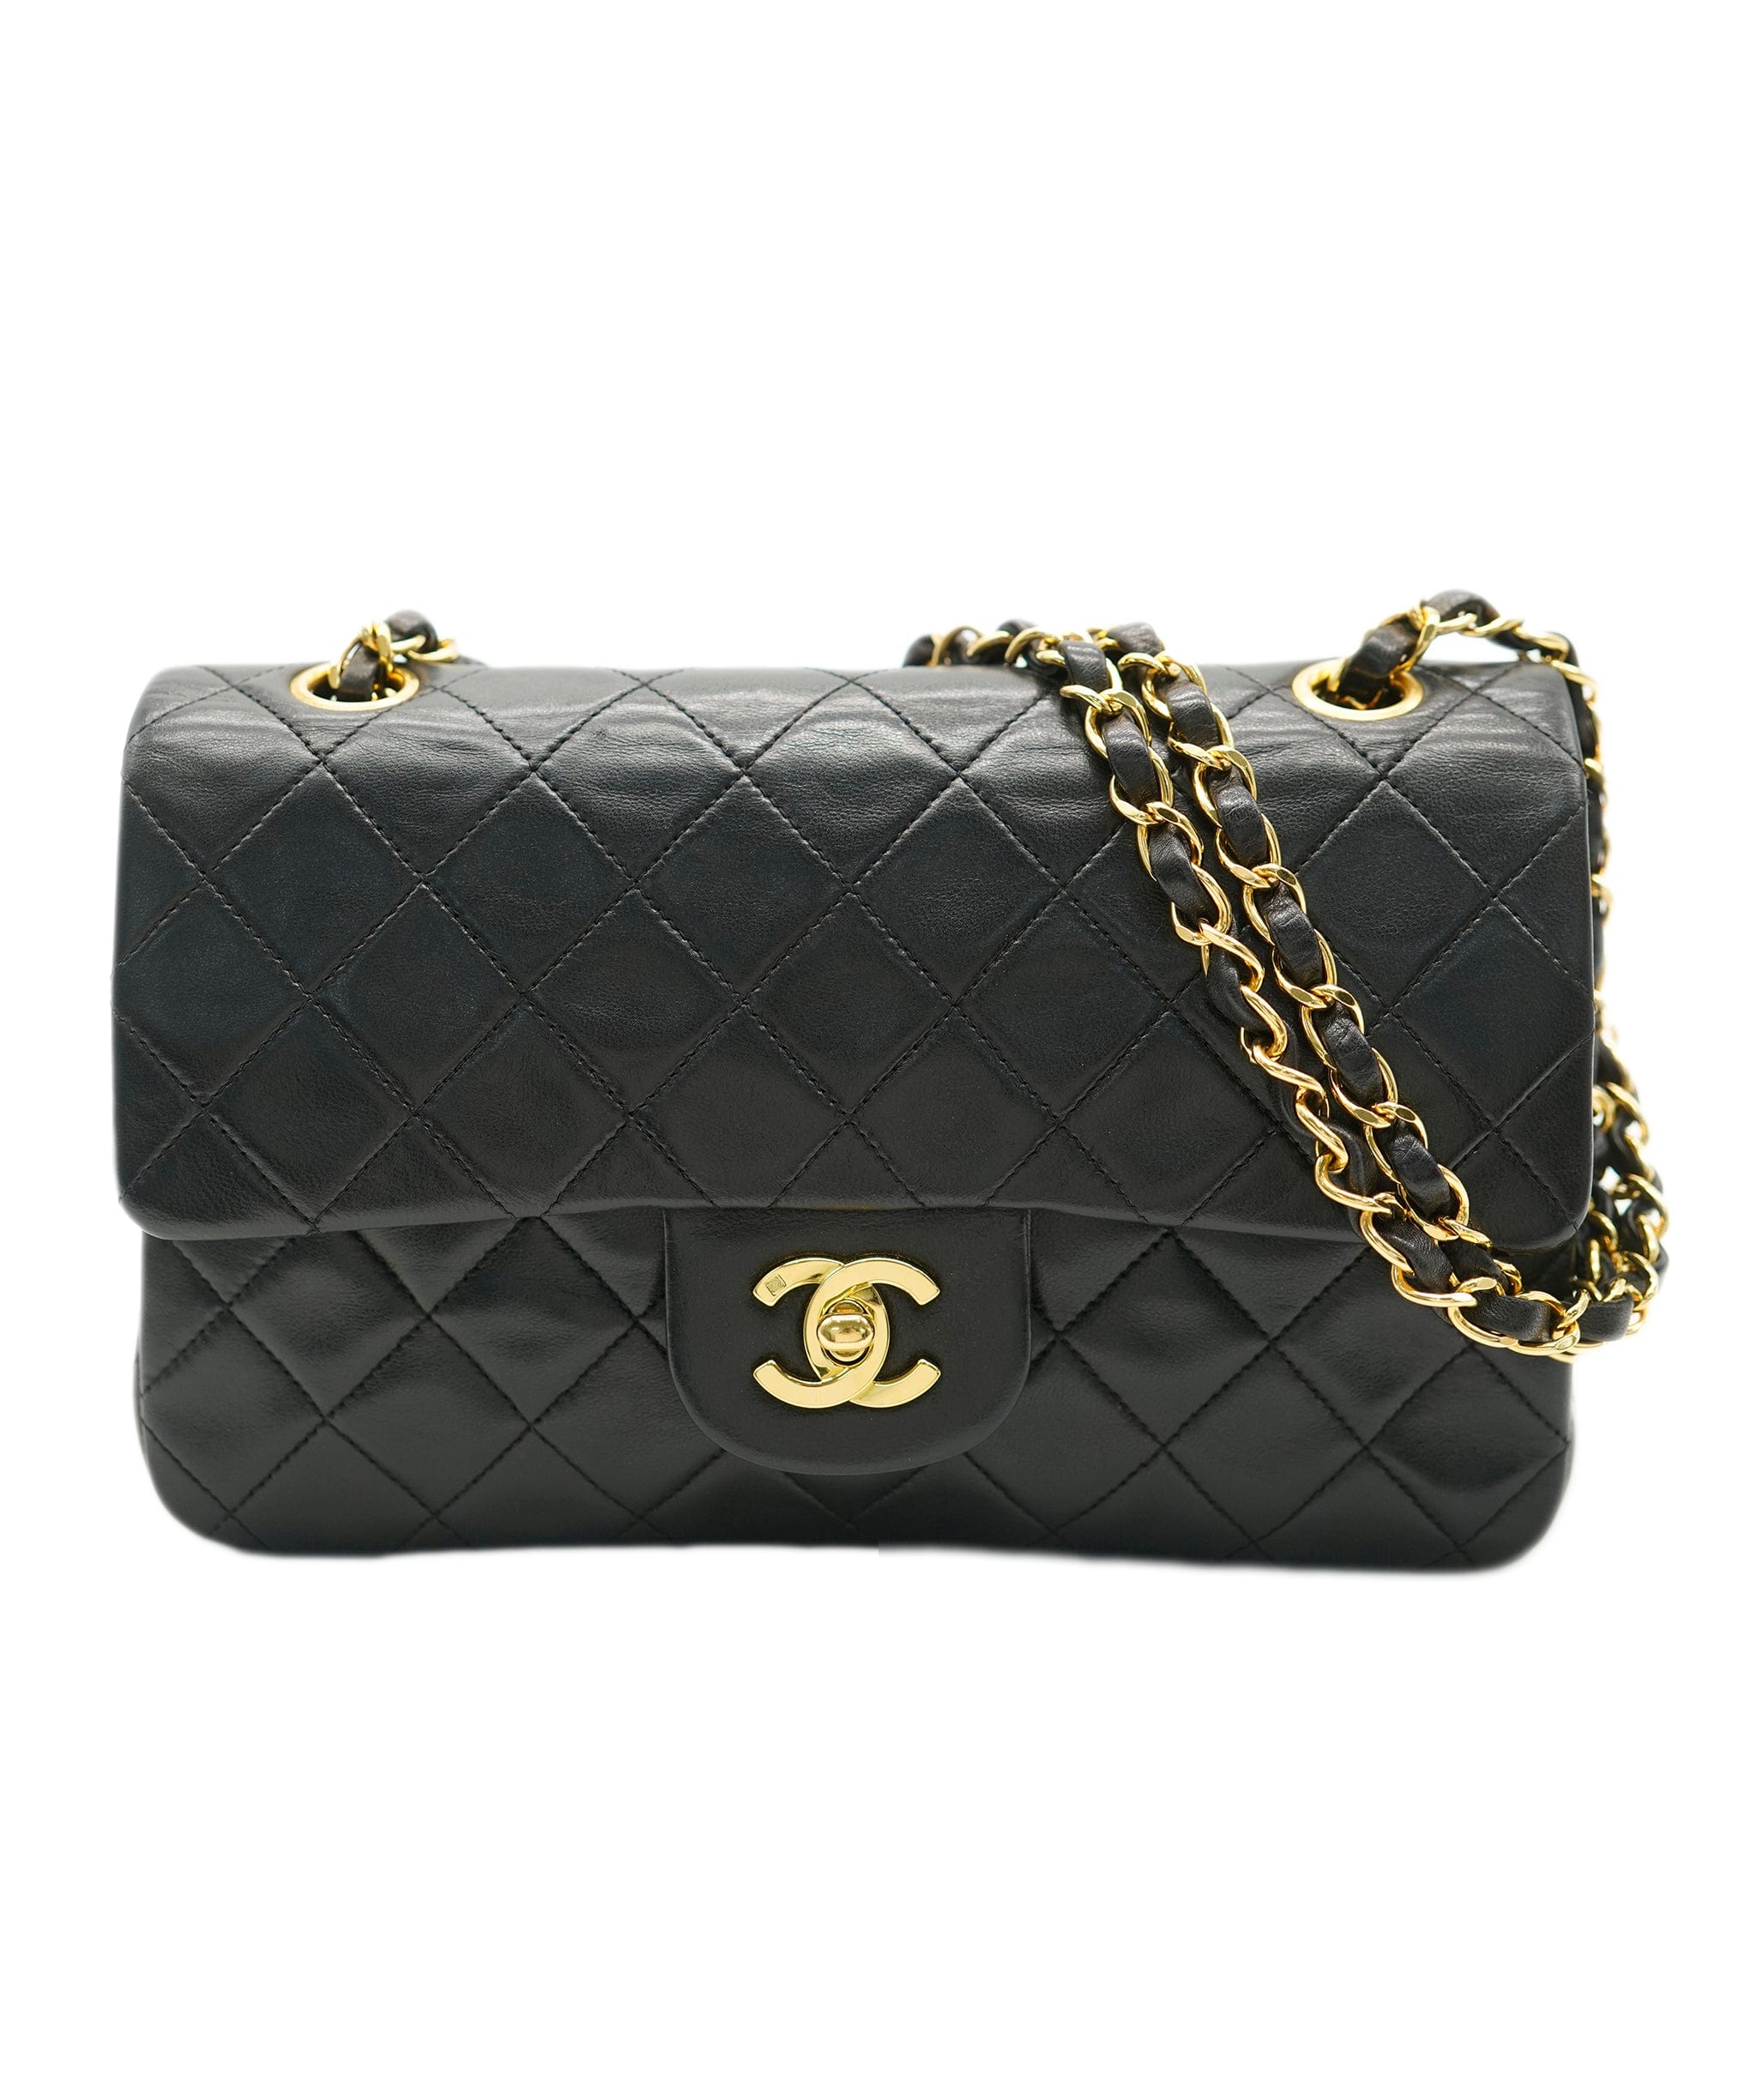 Chanel Chanel Vintage Classic Flap Small Black Lambskin GHW #3 ASL10616